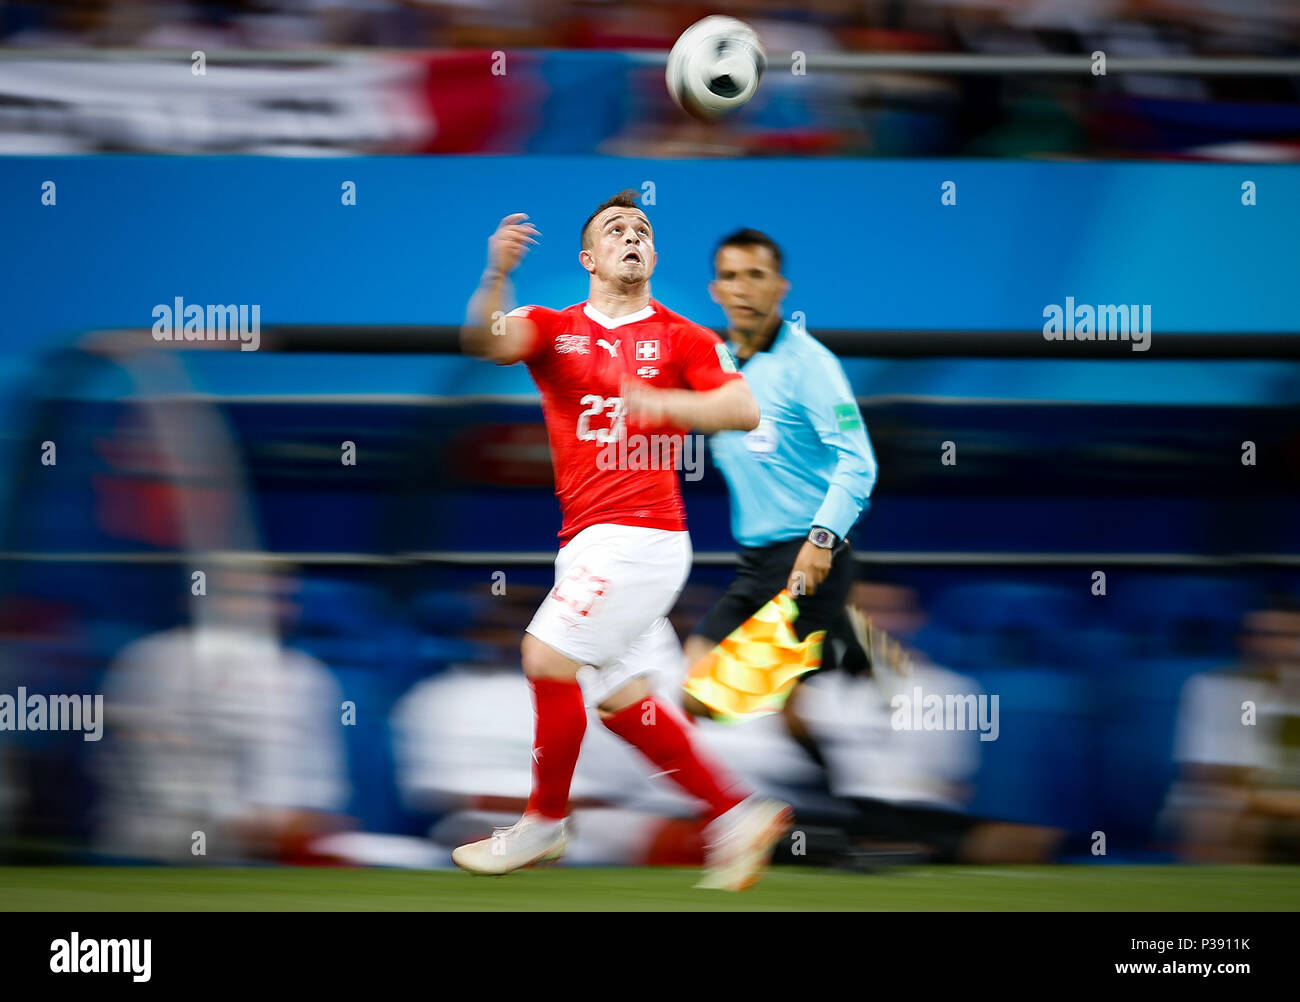 Rostov, Russia. 17th June, 2018. BRAZIL VS SWITZERLAND - Xherdan Shaqiri of Switzerland during Brazil-Switzerland match valid for the first round of group E of the 2018 World Cup, held at the Rostov Arena in Rostov on Don, Russia. (Photo: Marcelo Machado de Melo/Fotoarena) Credit: Foto Arena LTDA/Alamy Live News Stock Photo